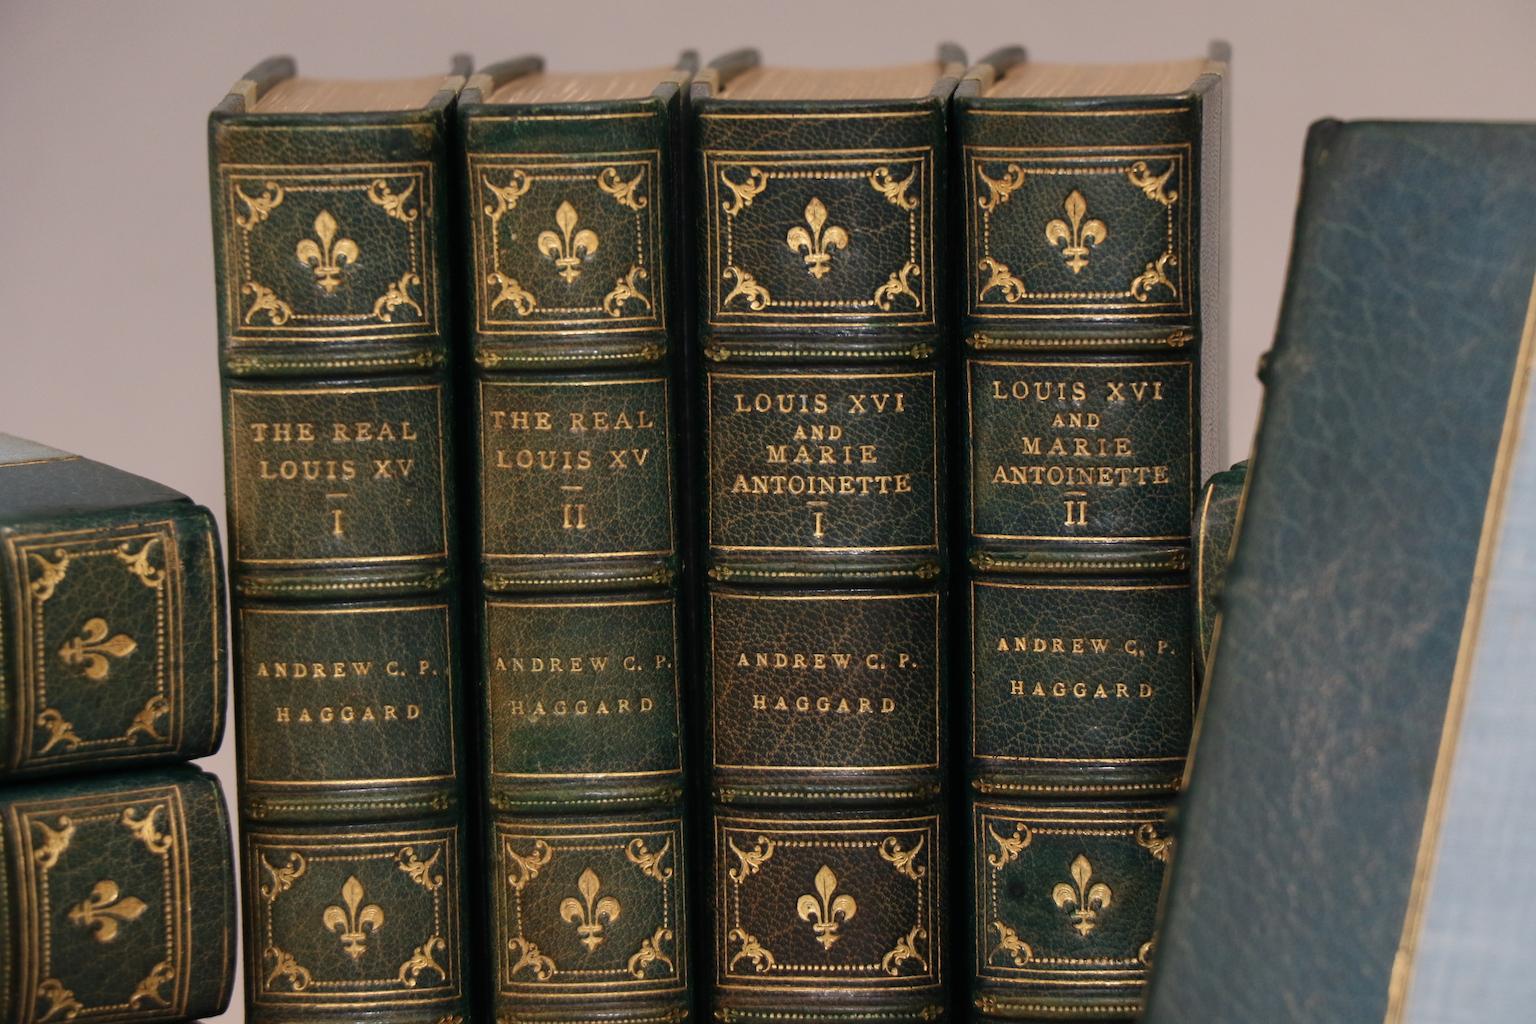 Leatherbound. 13 volumes. Octavos. Bound in 3/4 blue Morocco with top edges gilt and gilt tooling on spines by Sangorski & Sutcliffe for Brentano's. Titles include 